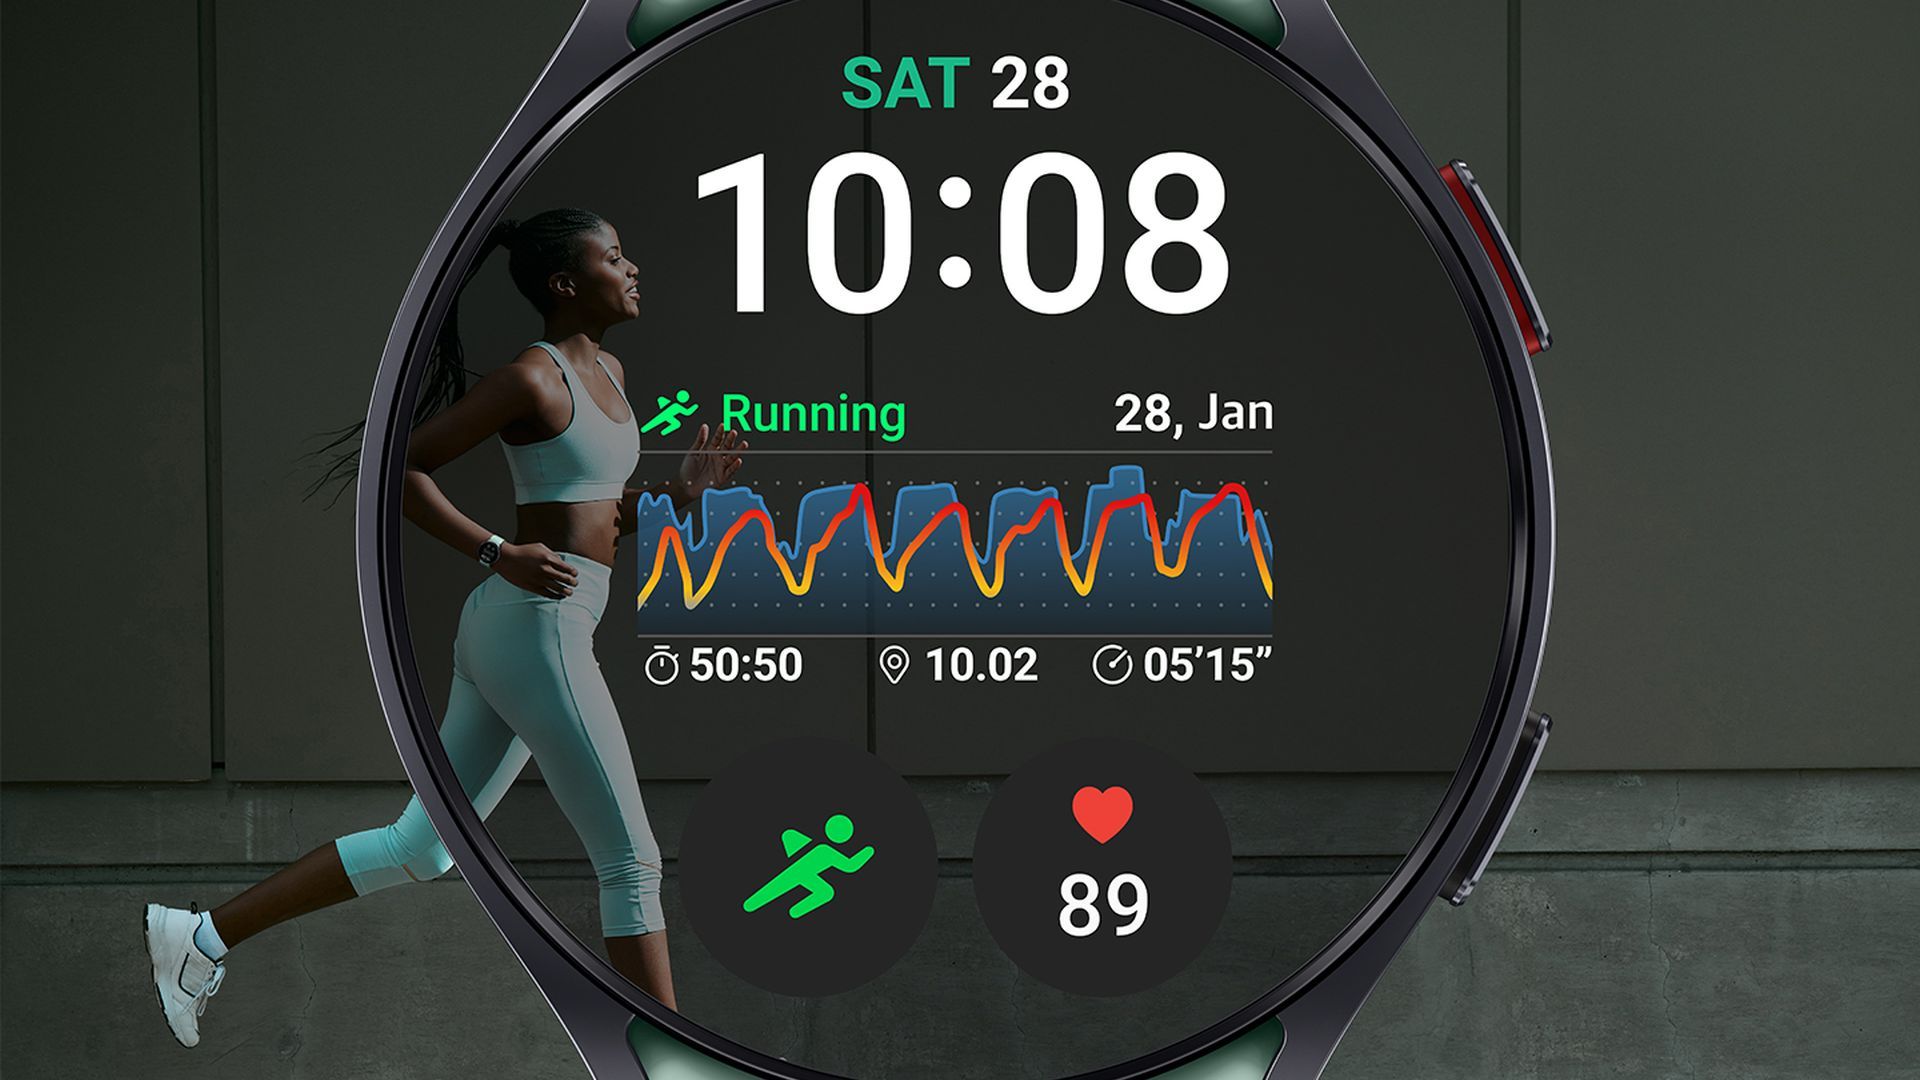 Image of the Samsung Galaxy Watch 6 showing running stats superimposed on the image of a person running 